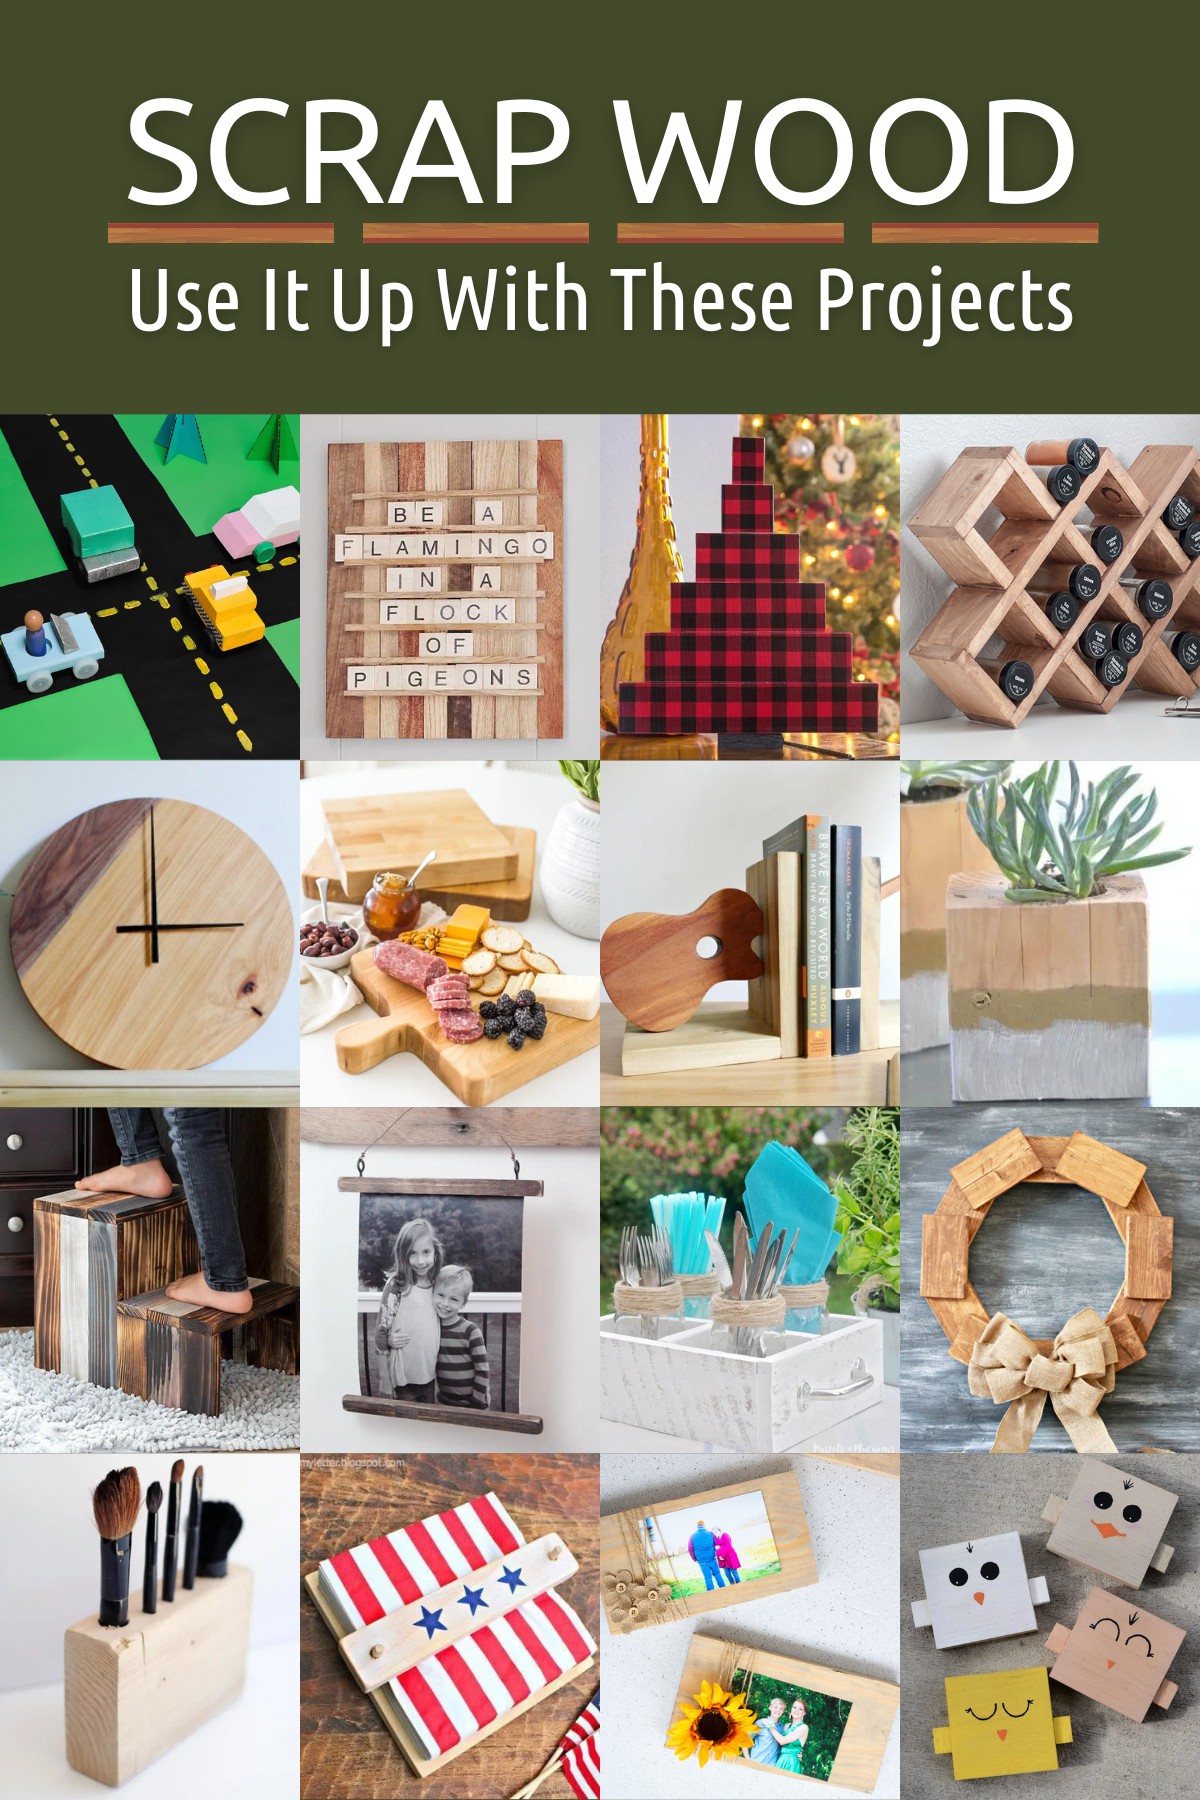 Use up your scrap wood with these DIY projects